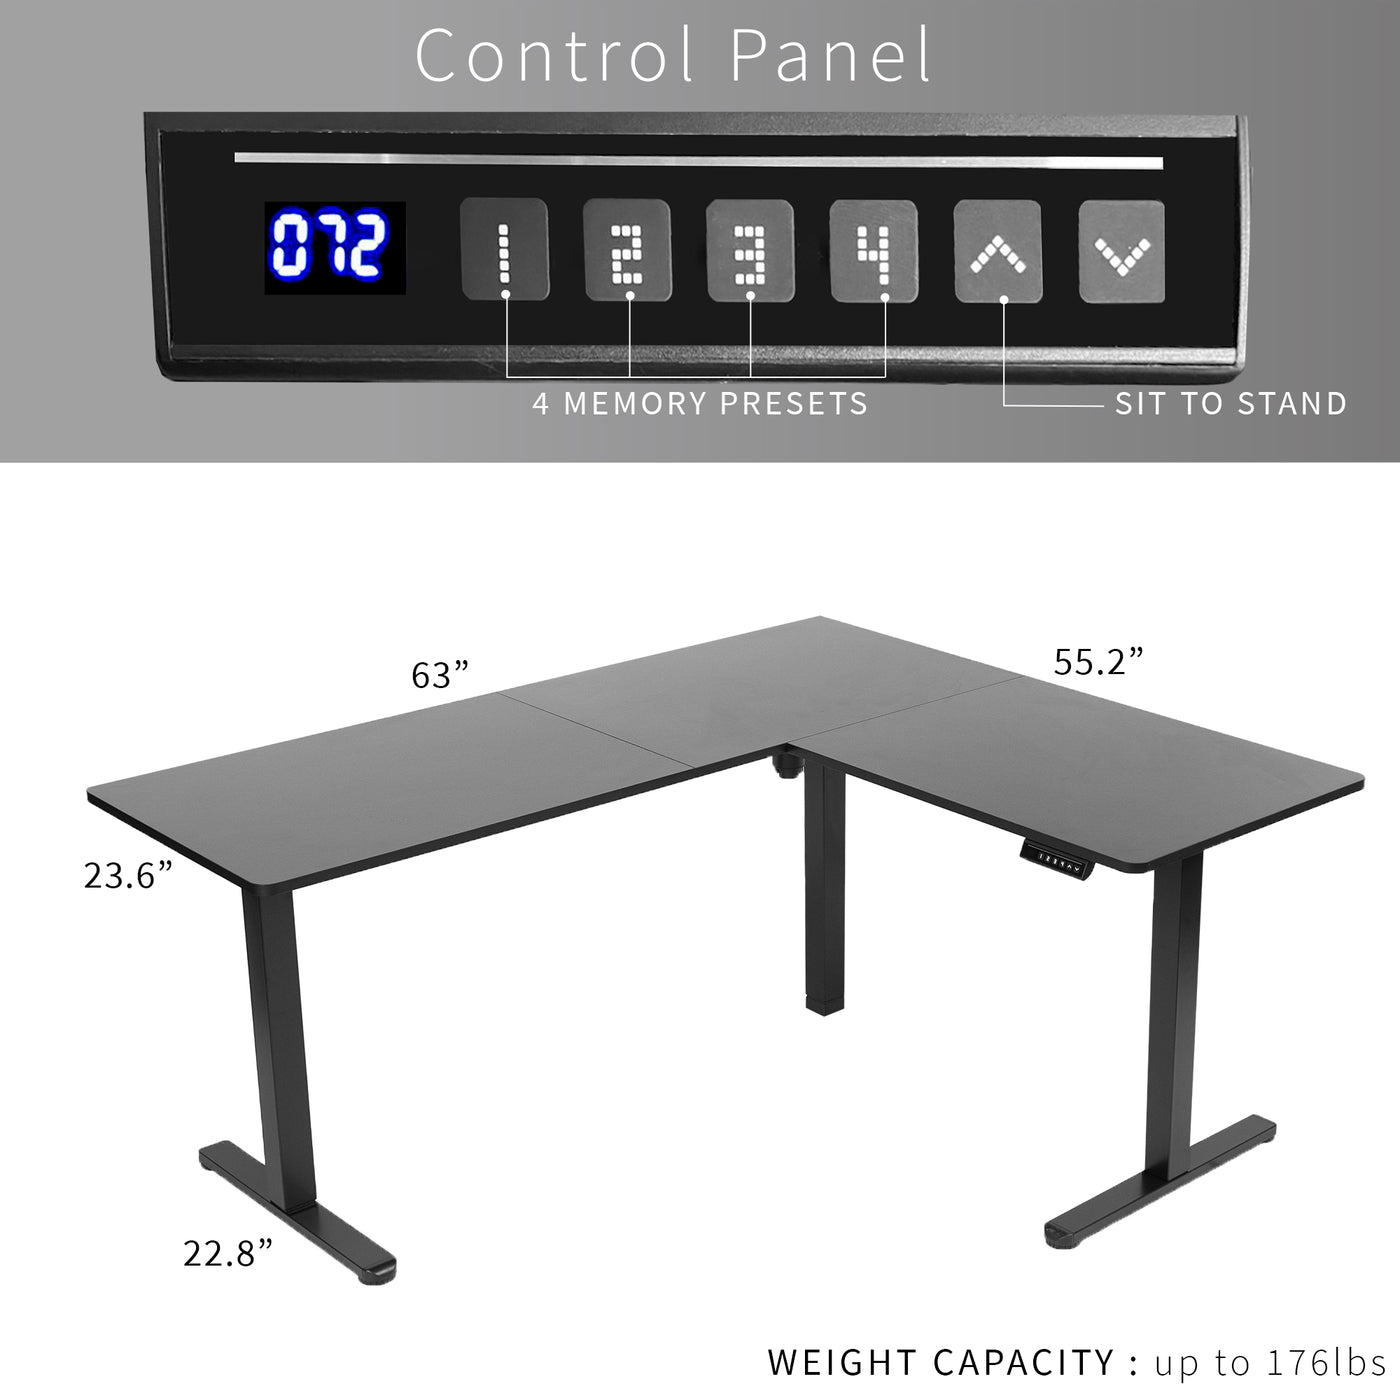 Programmable panel with easily accessible sit-to-stand presets.